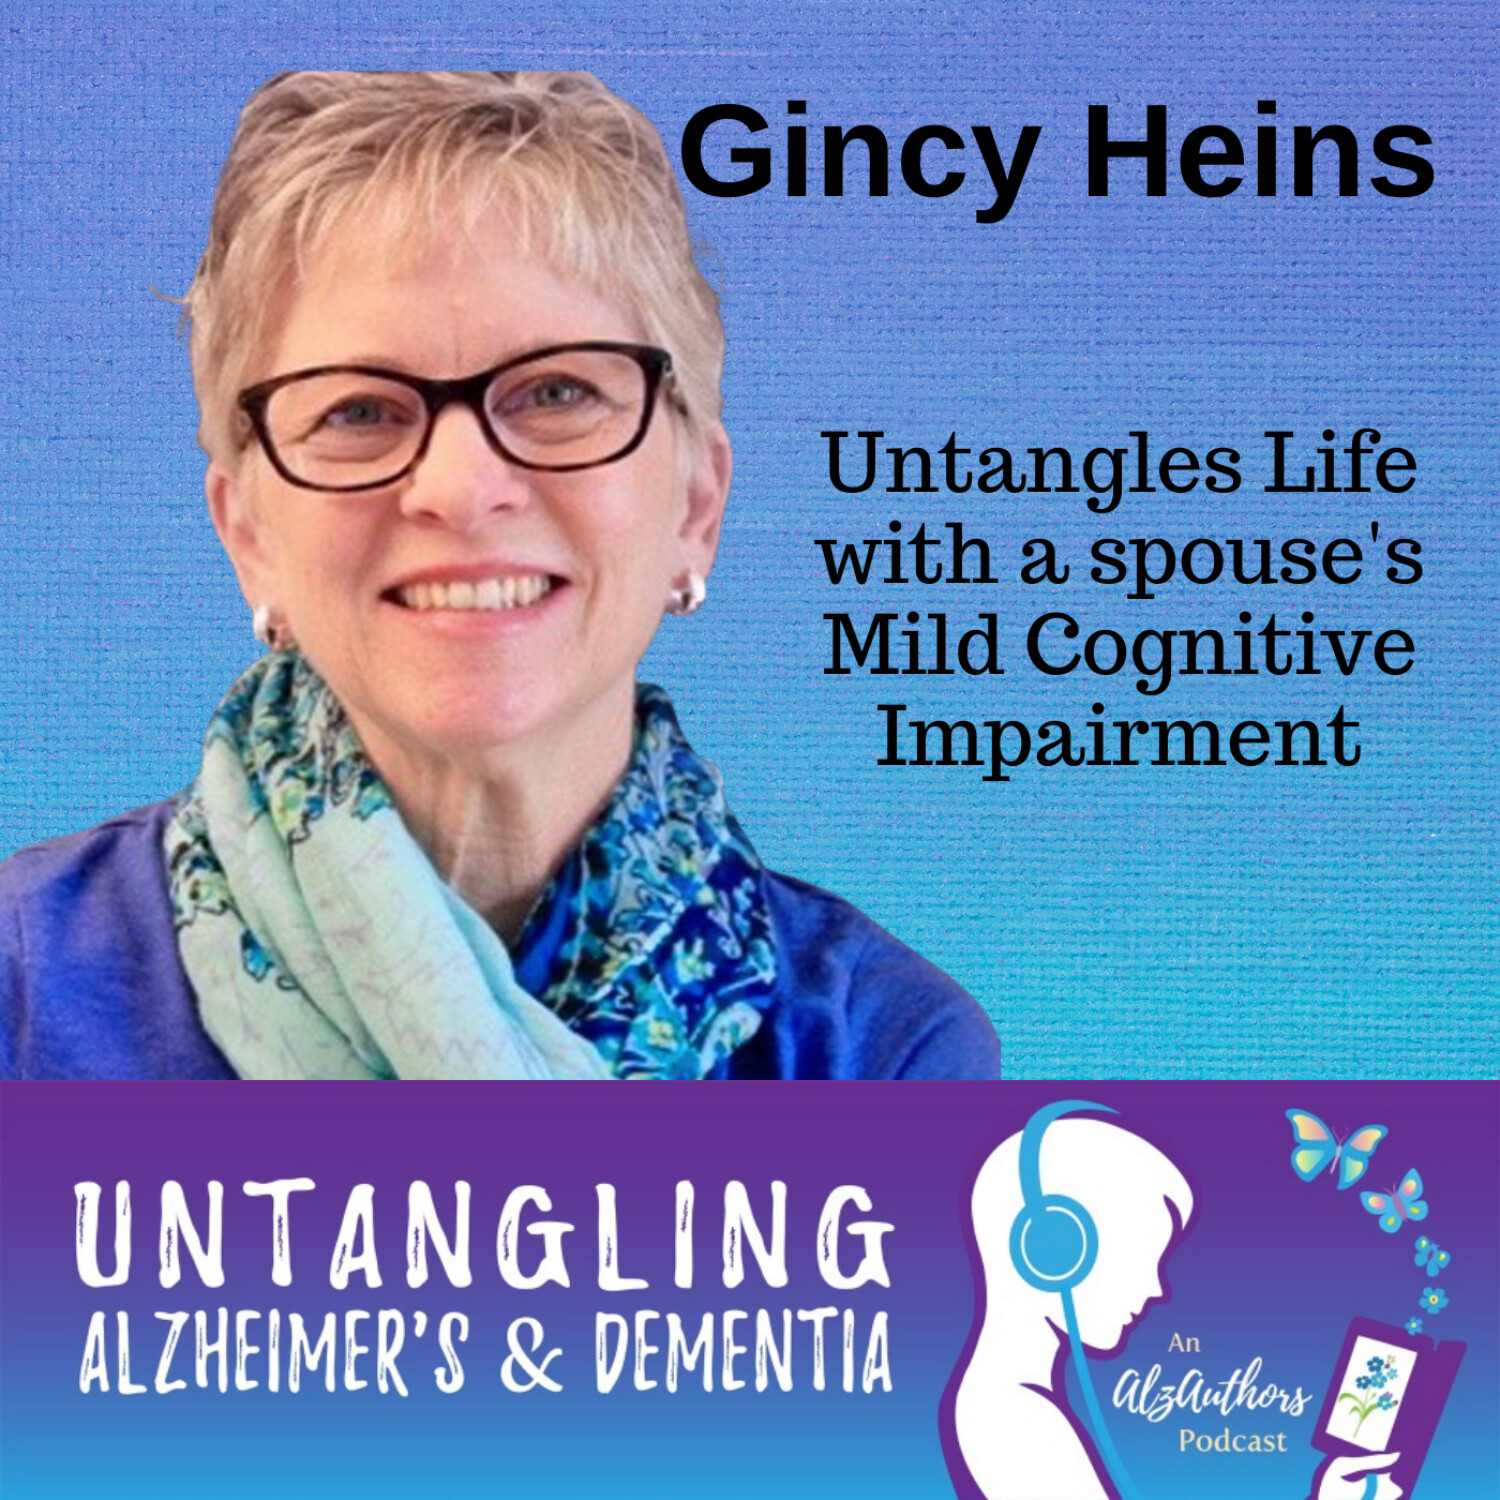 REPLAY: Gincy Heins Untangles Living with a Spouse's Mild Cognitive Impairment